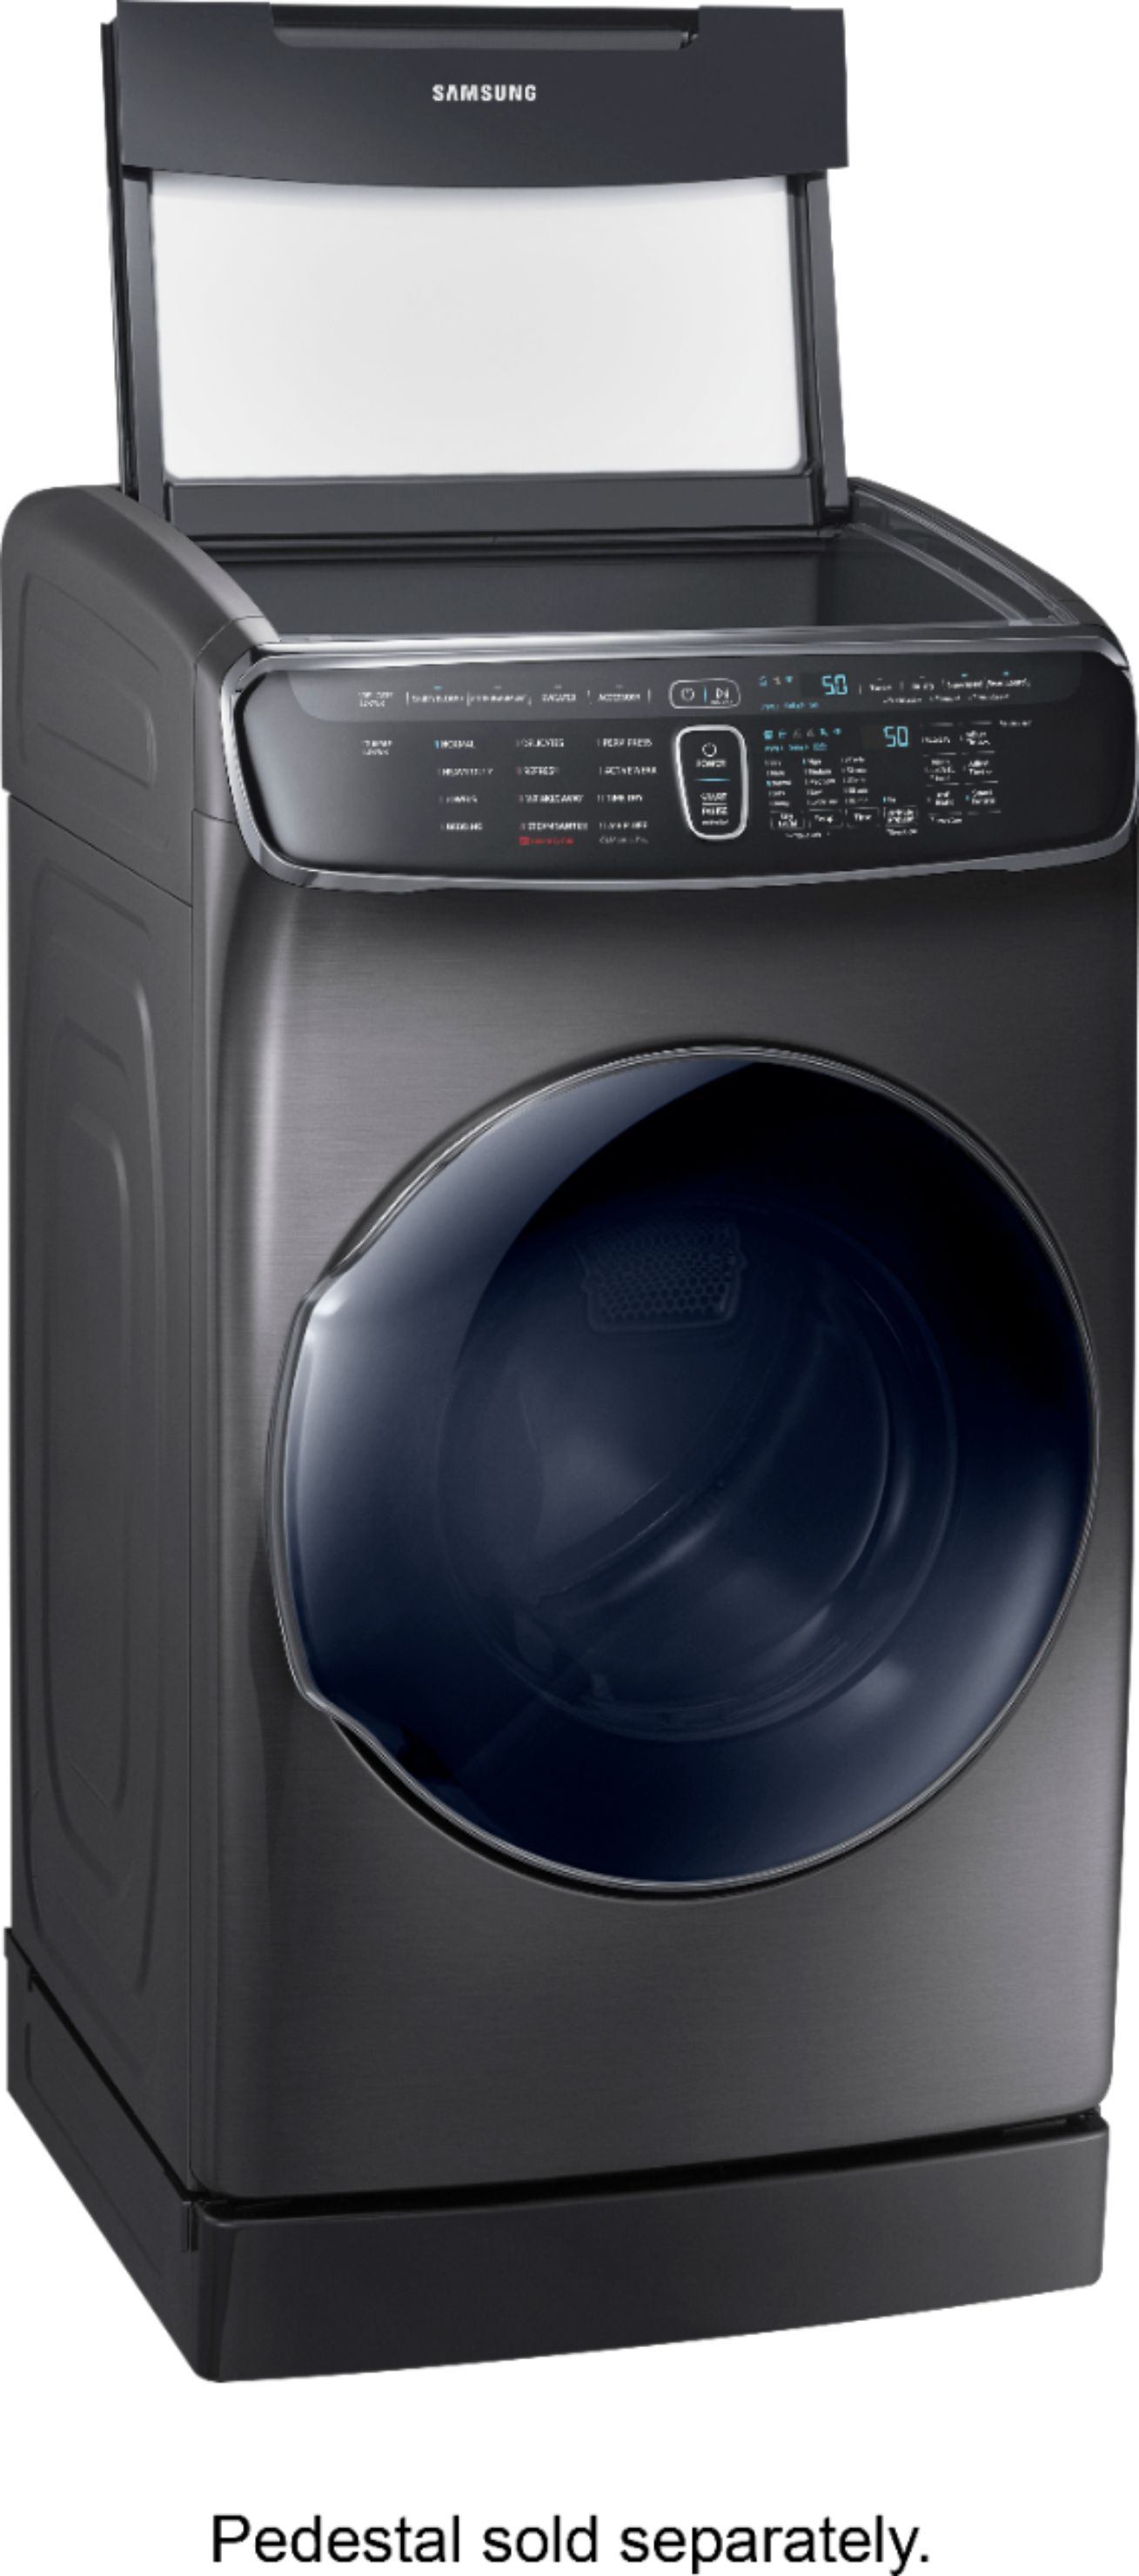 Angle View: Samsung - 7.5 Cu. Ft. Smart Electric Dryer with Steam and FlexDry - Black stainless steel